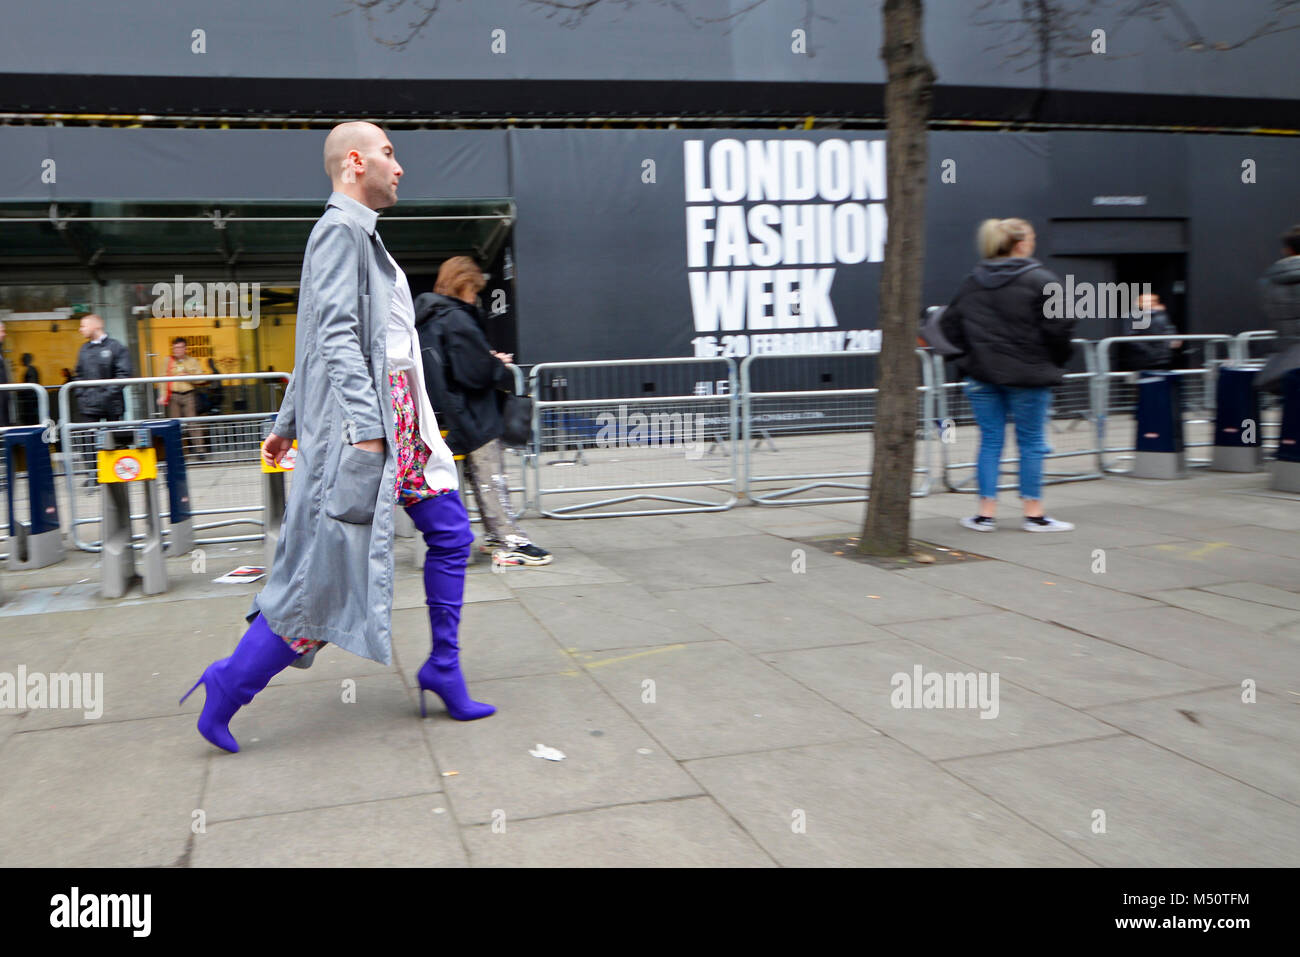 Man in high heeled thigh high feminine boots passing the London Fashion Week venue The Store. Male walking past in ladies boots. Cross dresser Stock Photo